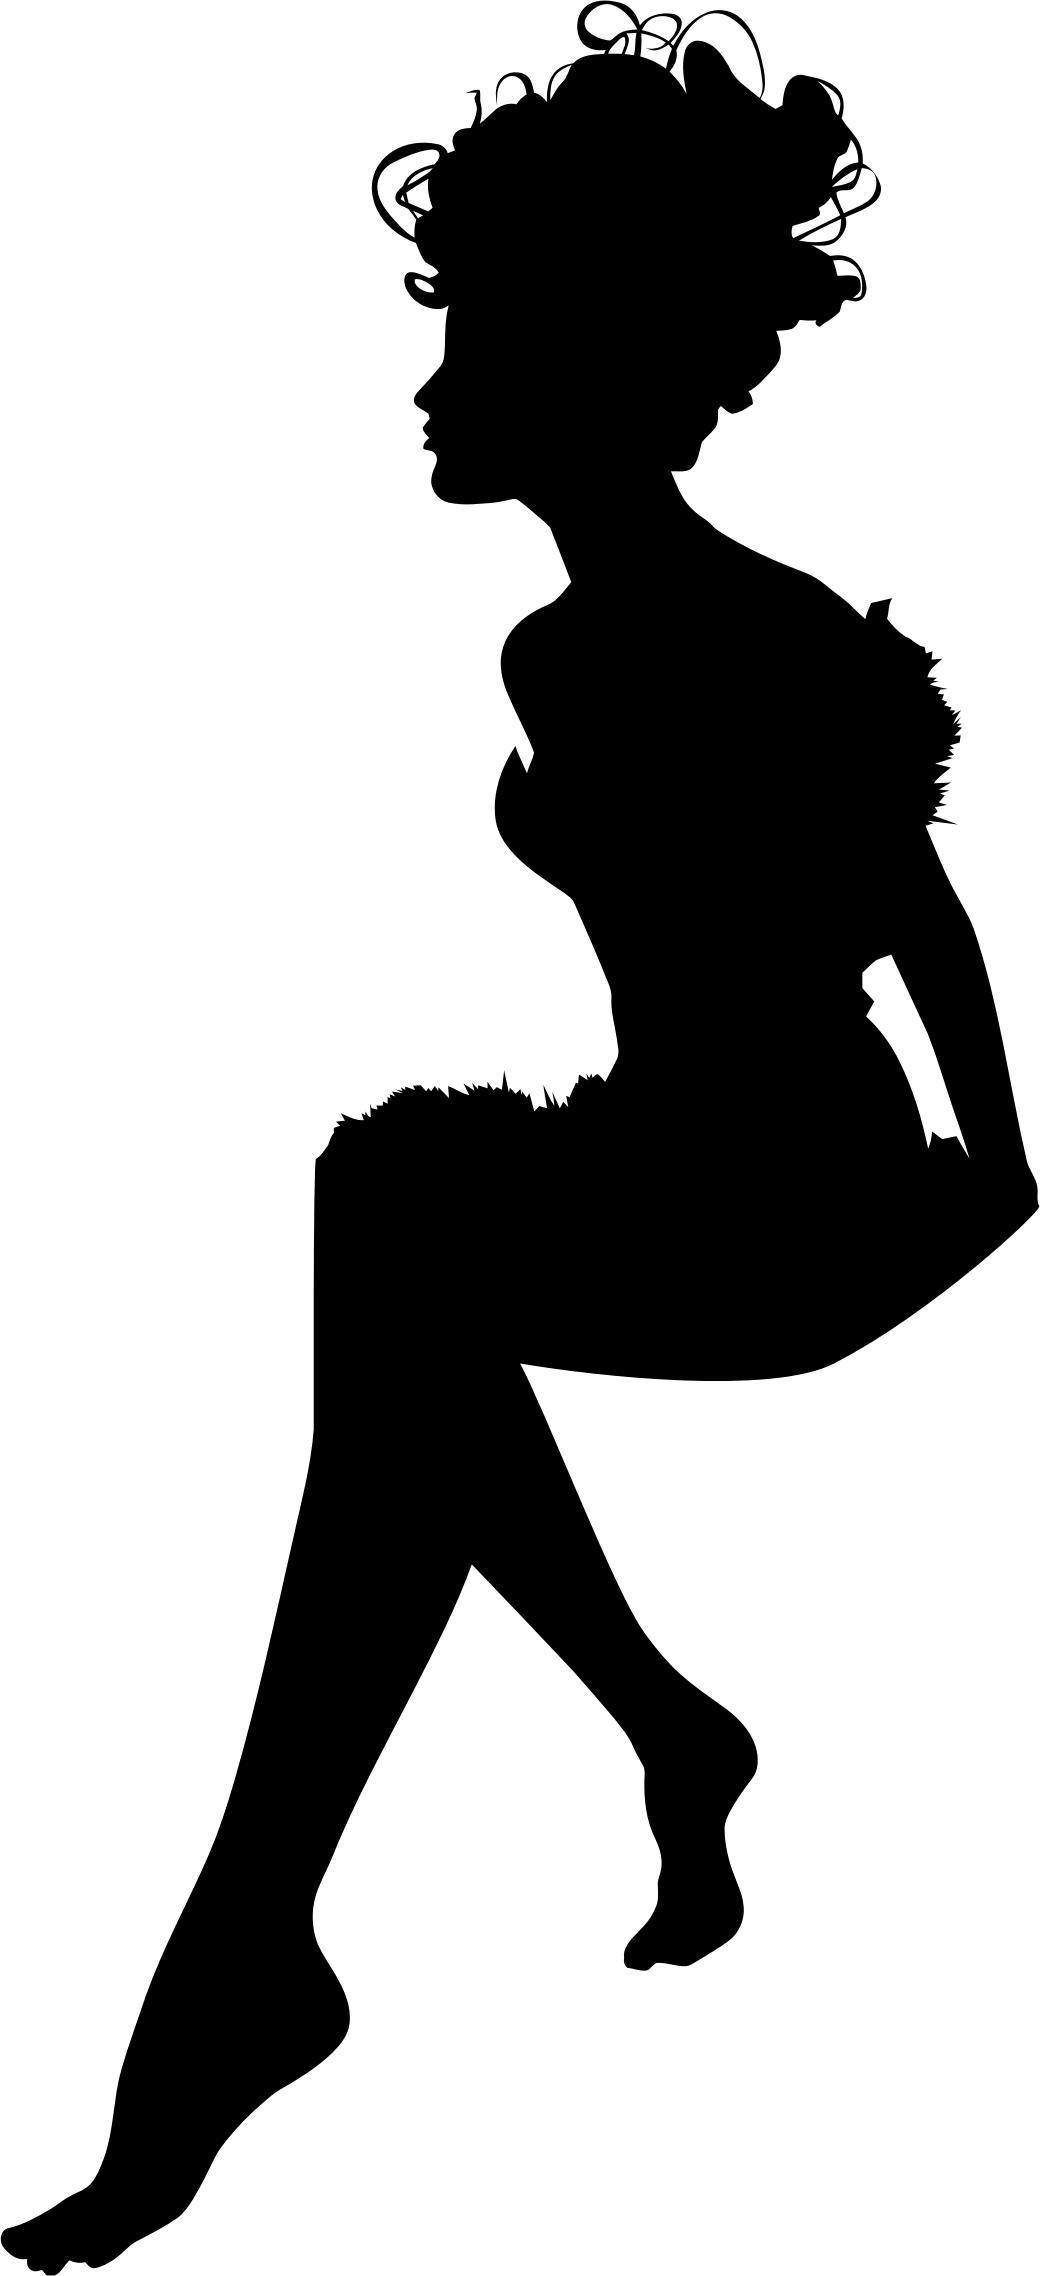 Fairy Sitting In CIrcle Minus Circle Silhouette png transparent